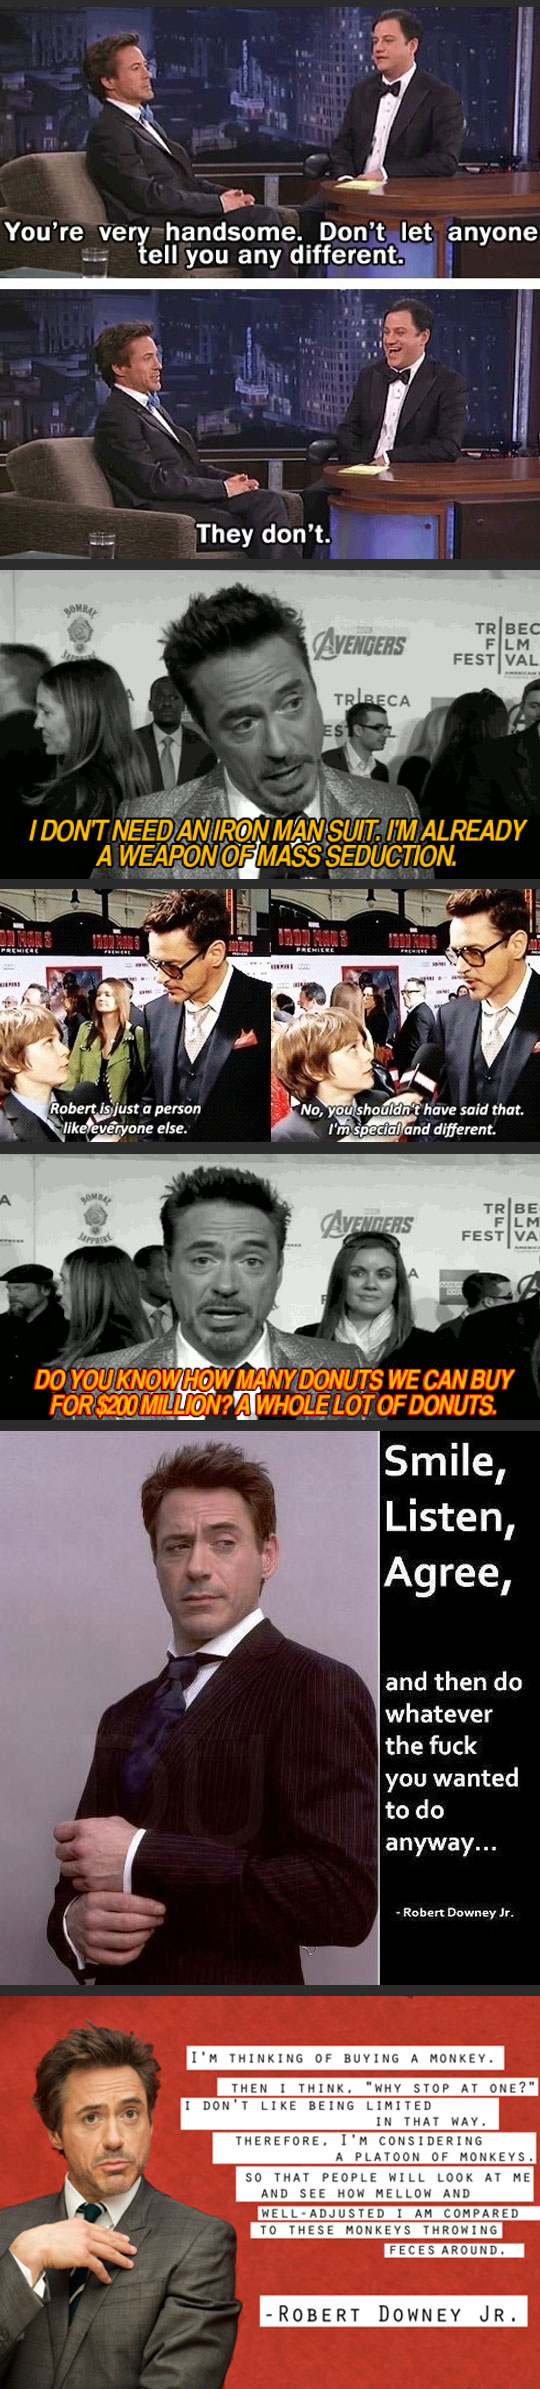 cool-Robert-Downey-Jr-facts-quotes-03